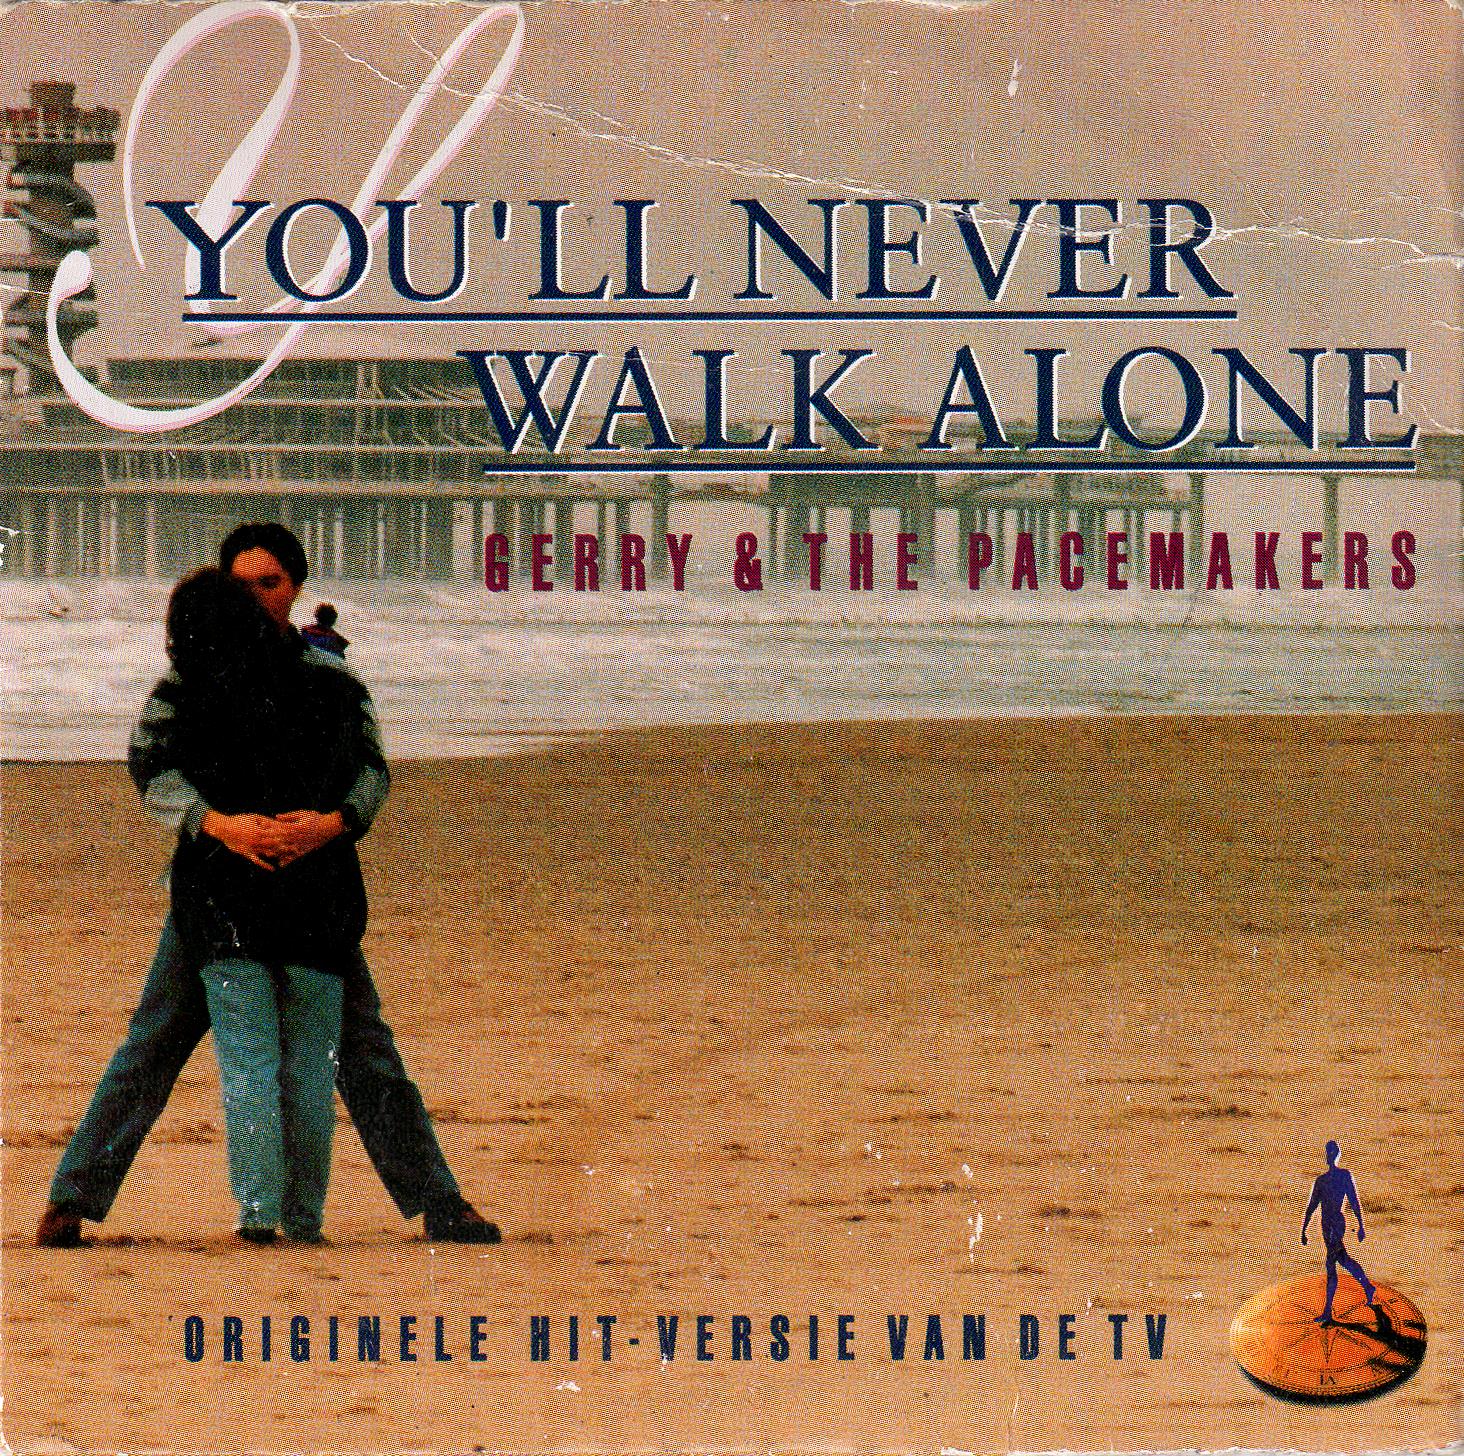 Gerry & The Pacemakers - You'll Never Walk Alone (Cds)(1963)